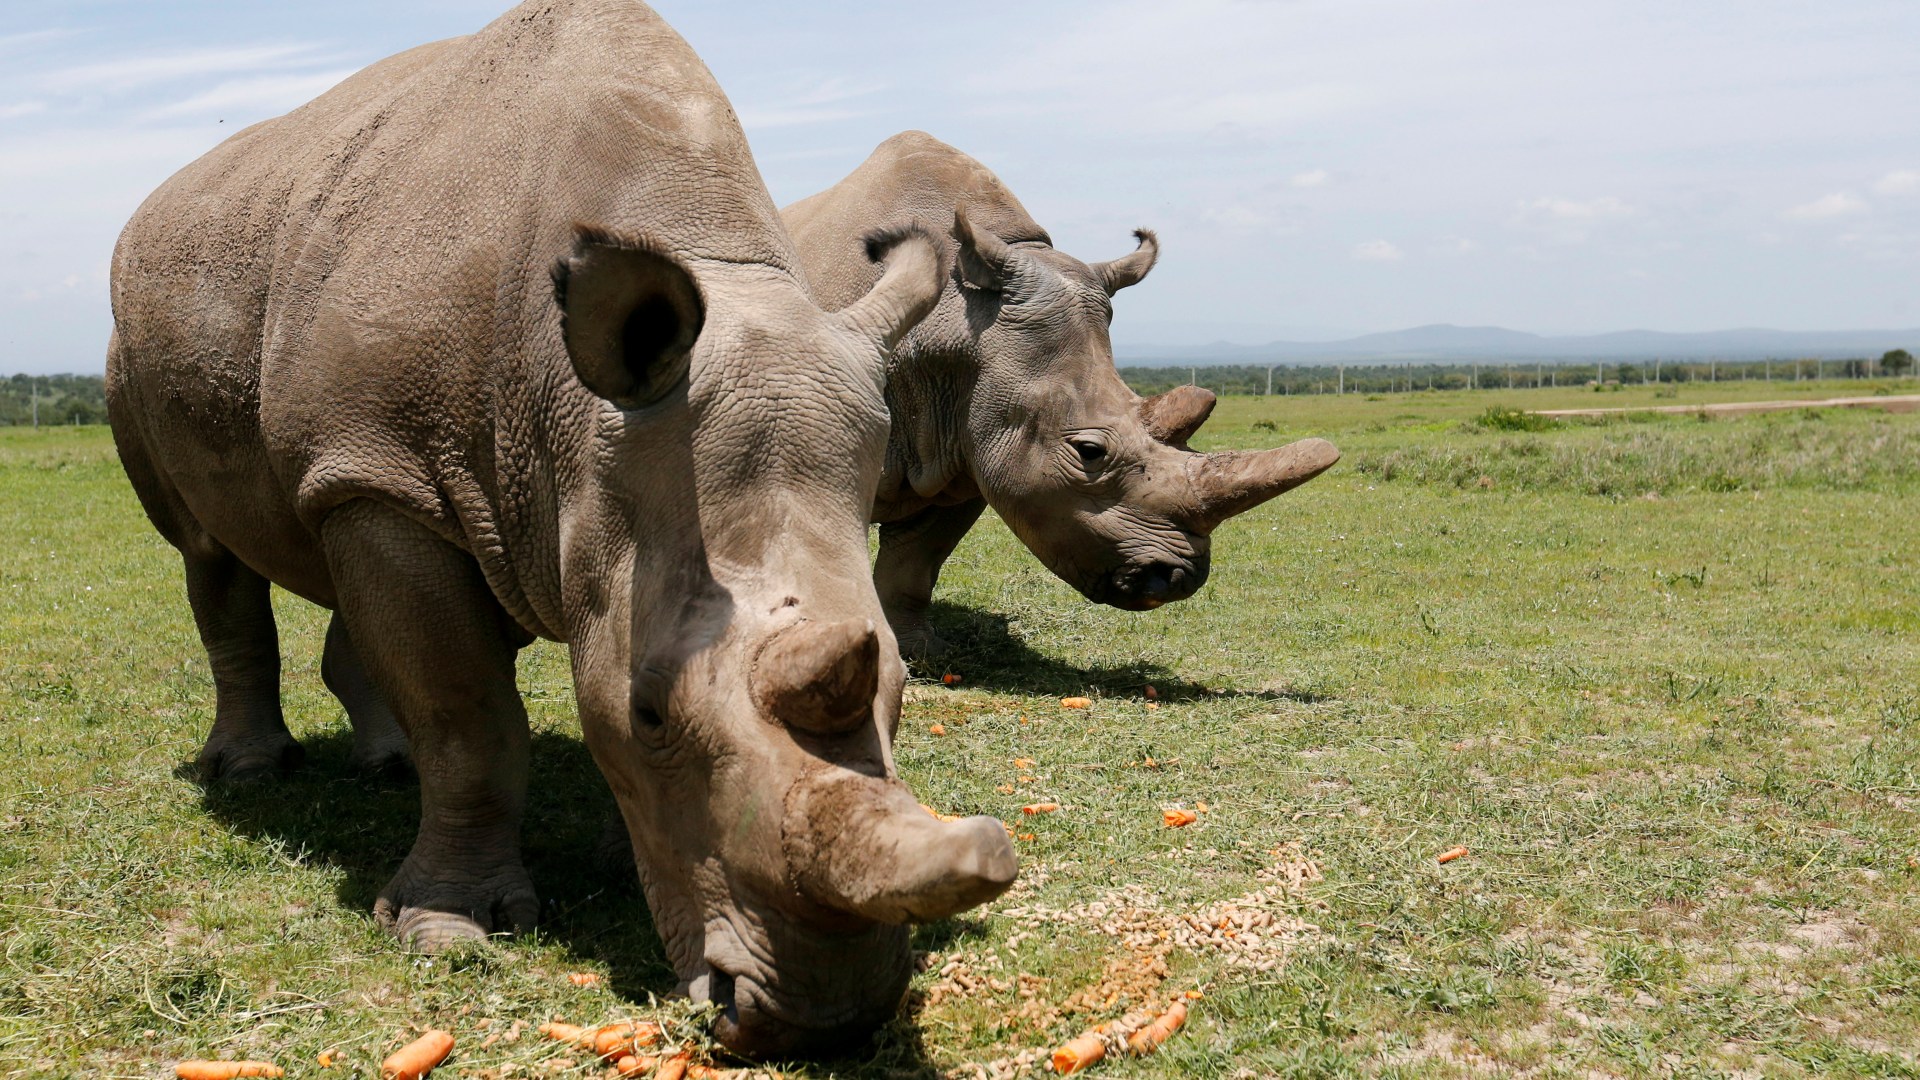 DIFFERENCE BETWEEN BLACK AND WHITE RHINOS IN NAMIBIA, Safari World Tours